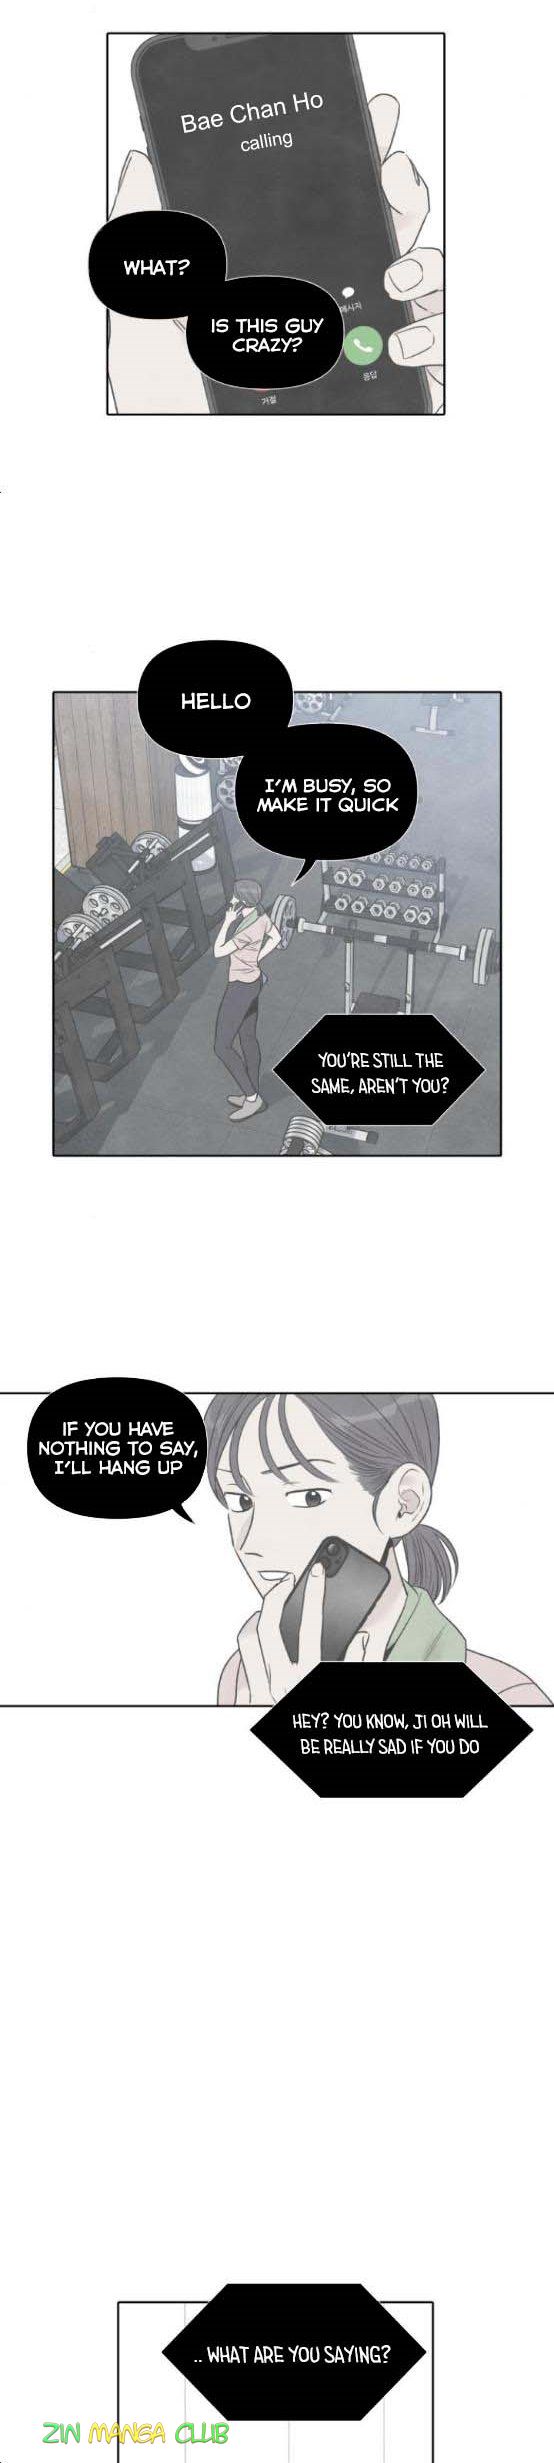 What I Decided To Die For - Page 4